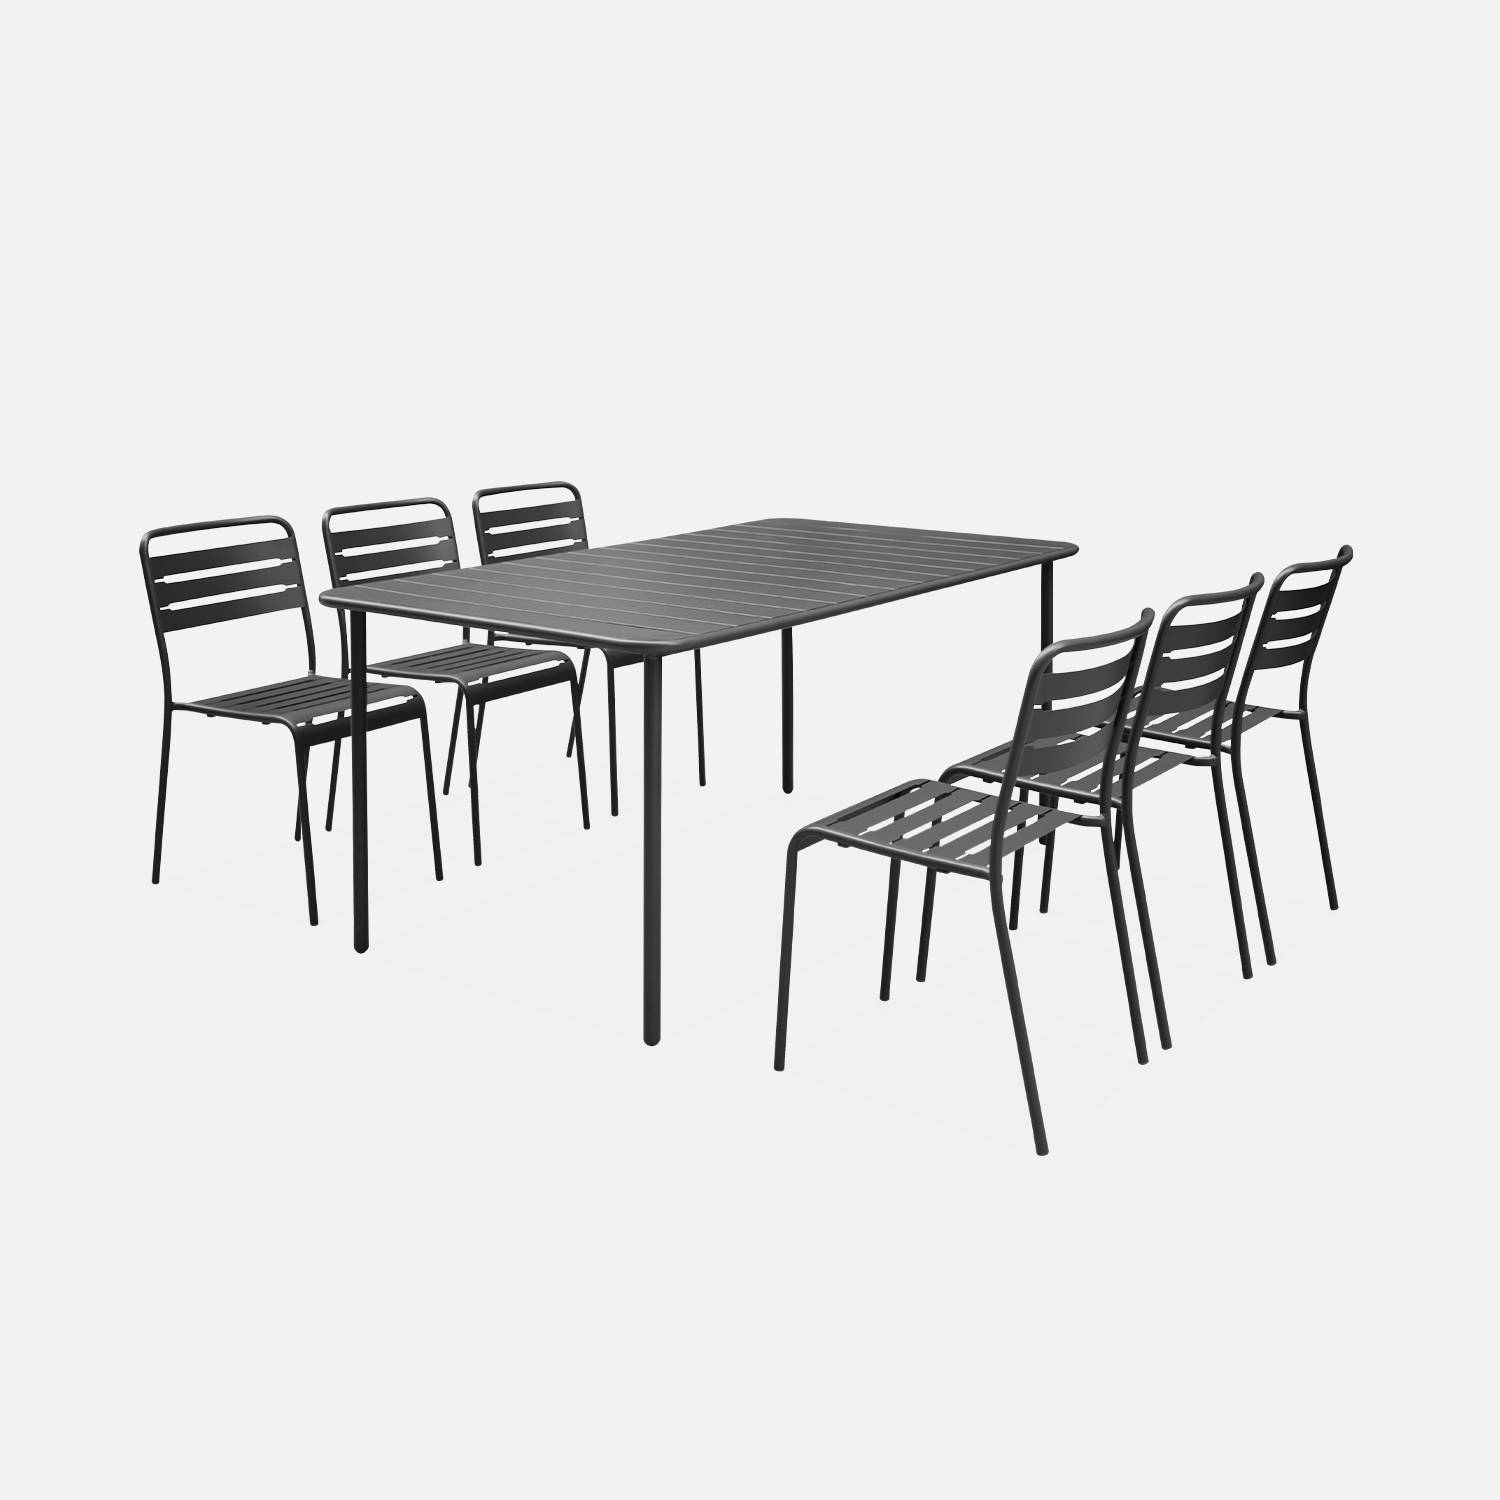 6-8 seater rectangular steel garden table set with chairs, 160cm, anthracite